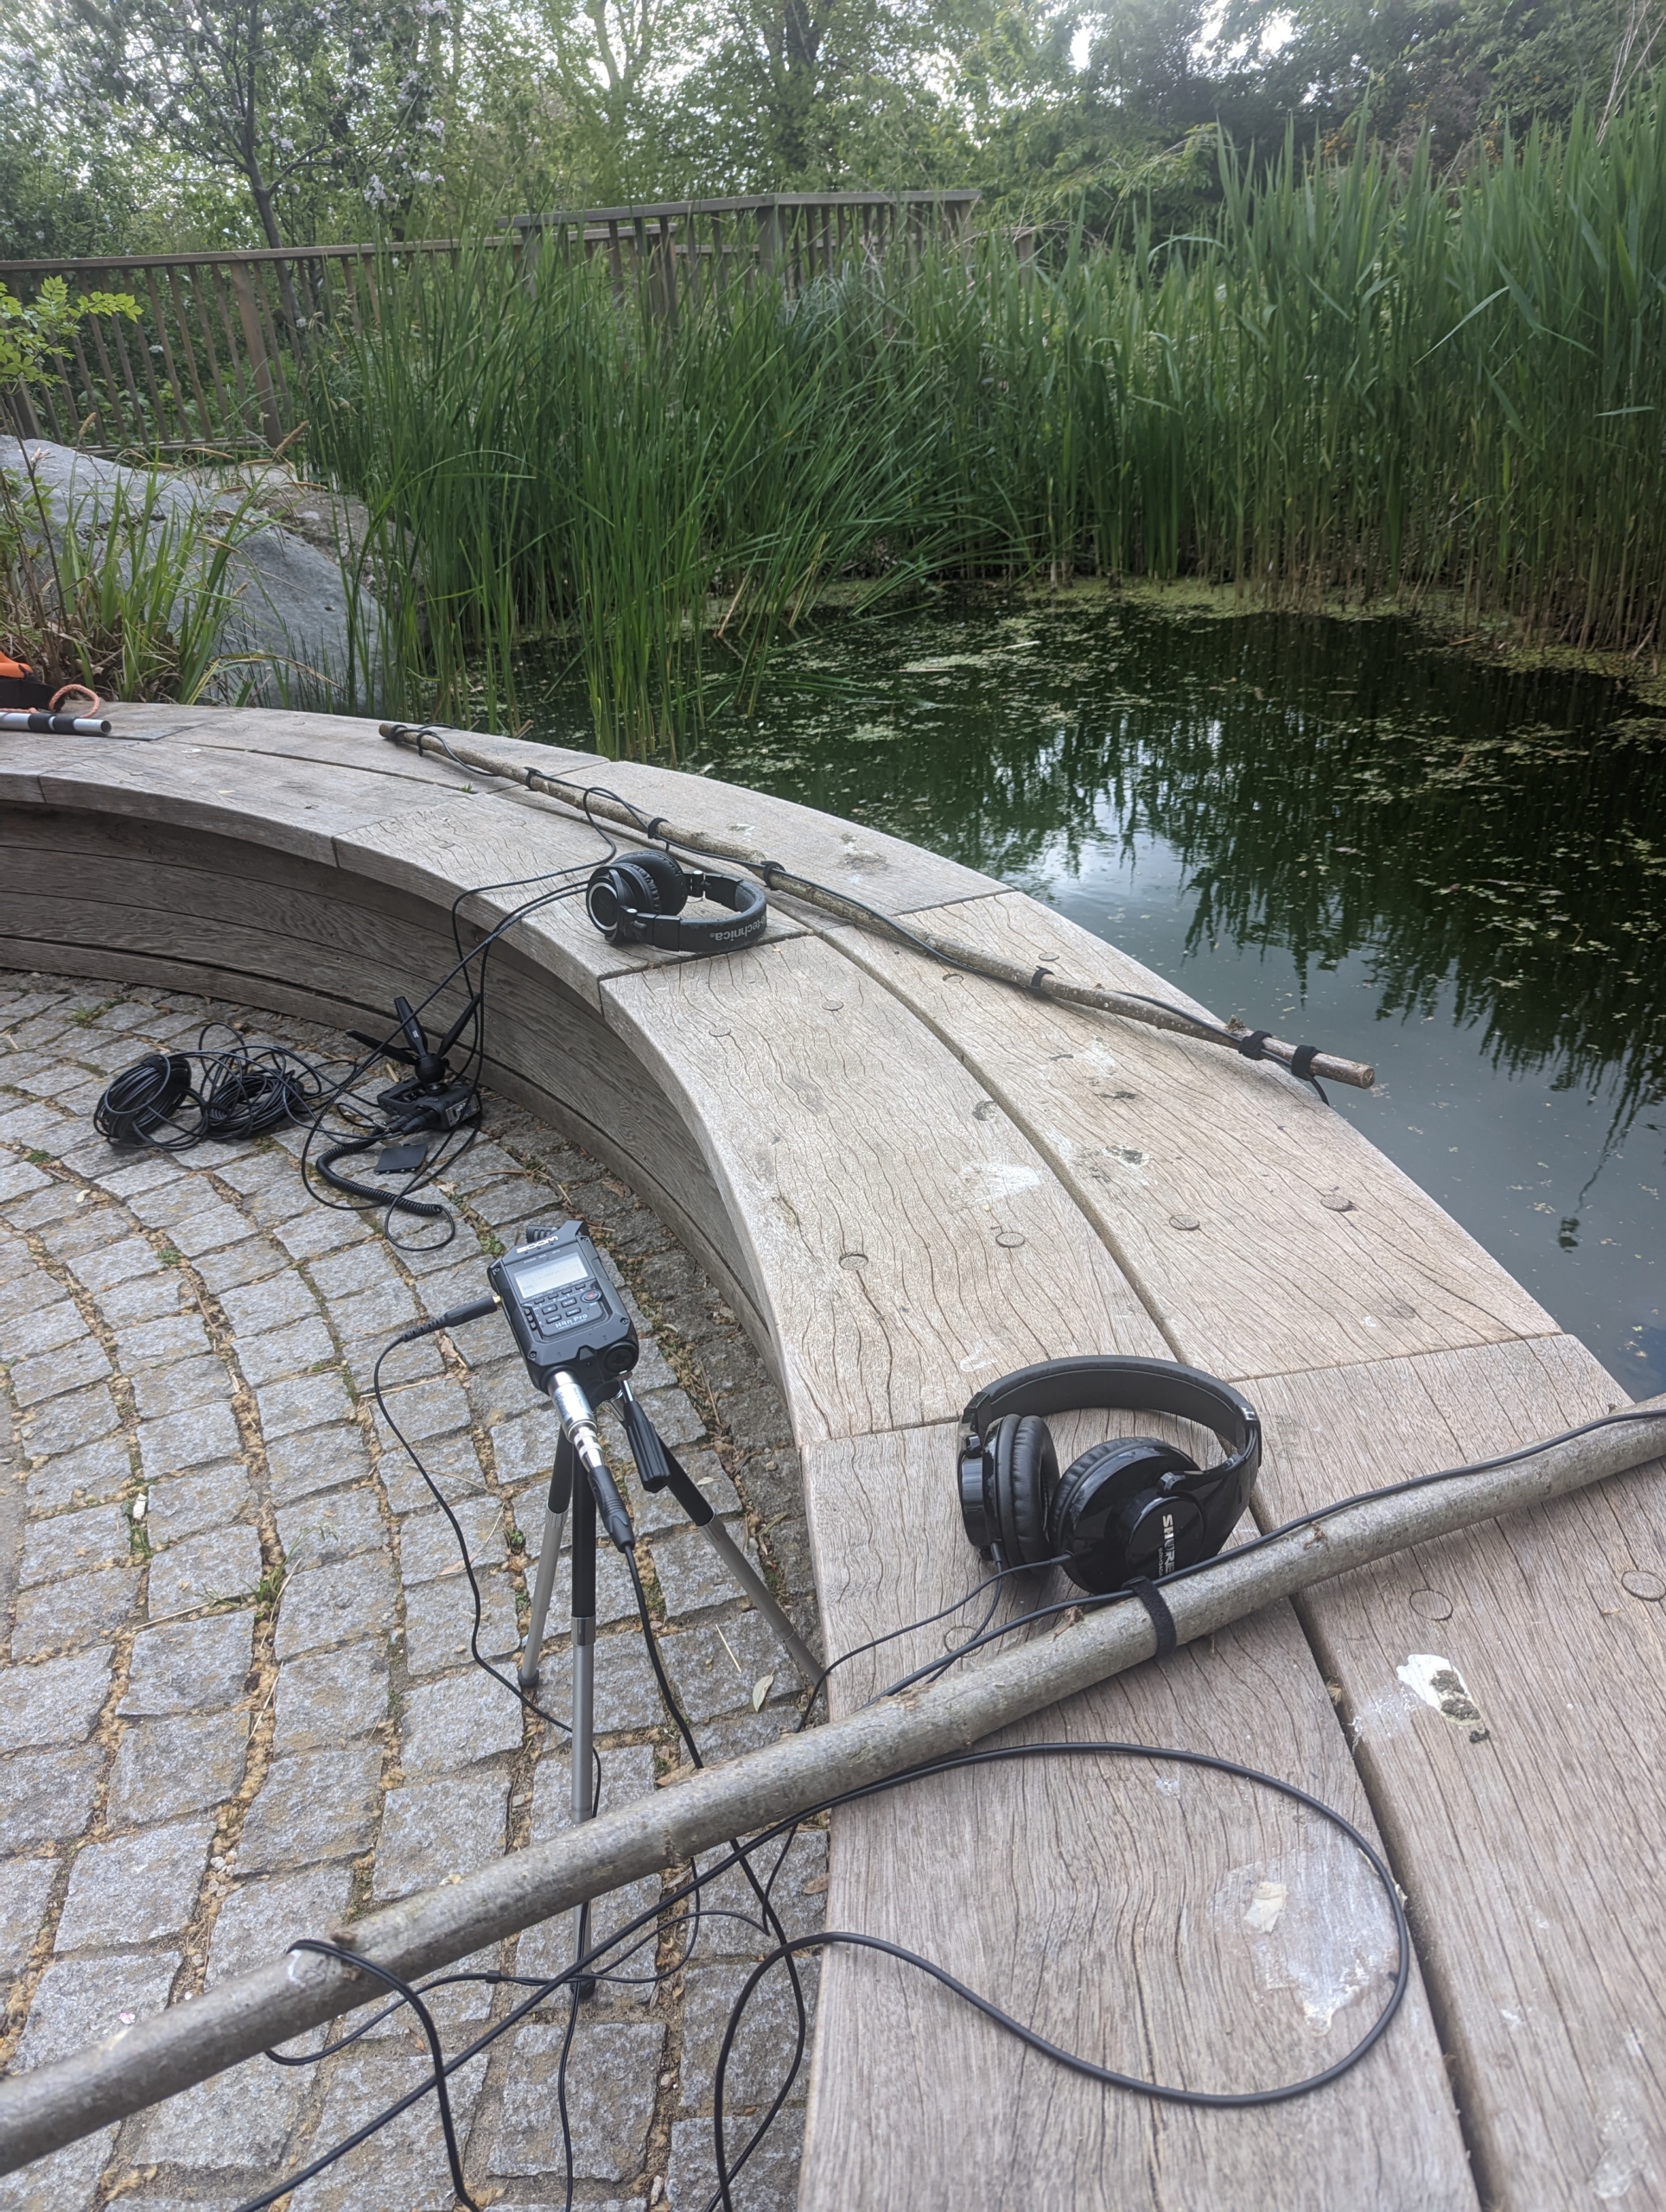 Sounds of the Subaquatic in The Royal Parks, London, led by sound artist Emily Peasgood, 2023. Two long pieces of birch are placed on a wooden bench that is next to the pond in The LookOut Garden at Hyde Park. It looks a bit like fishing rods, and a hydrophone is attached to the end dangling into the water. There are two pairs of headphones resting on the bench.